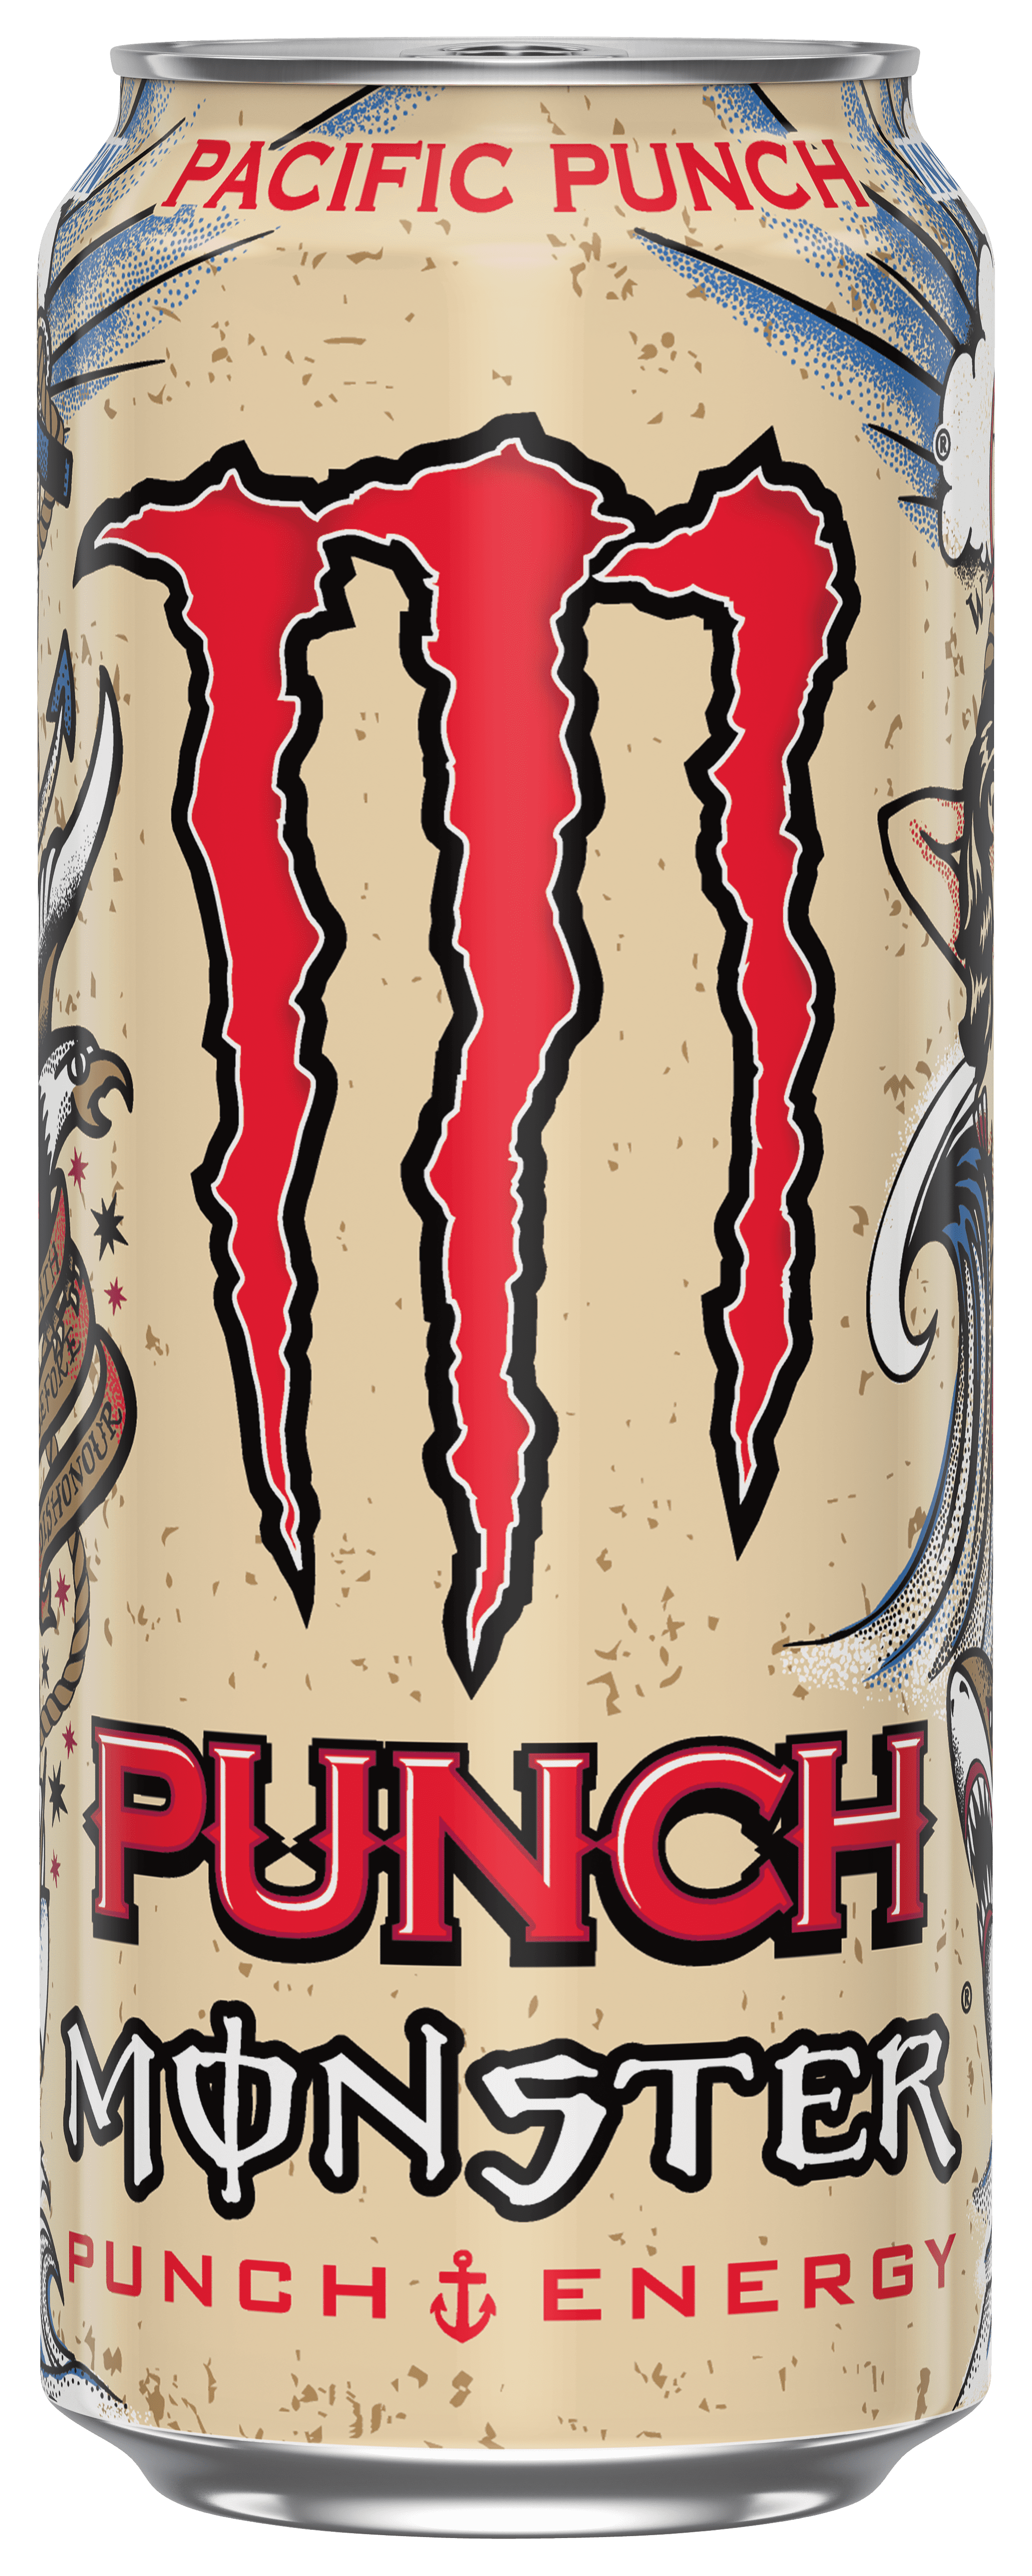 Monster Pacific Punch (1 x 0.5 l)